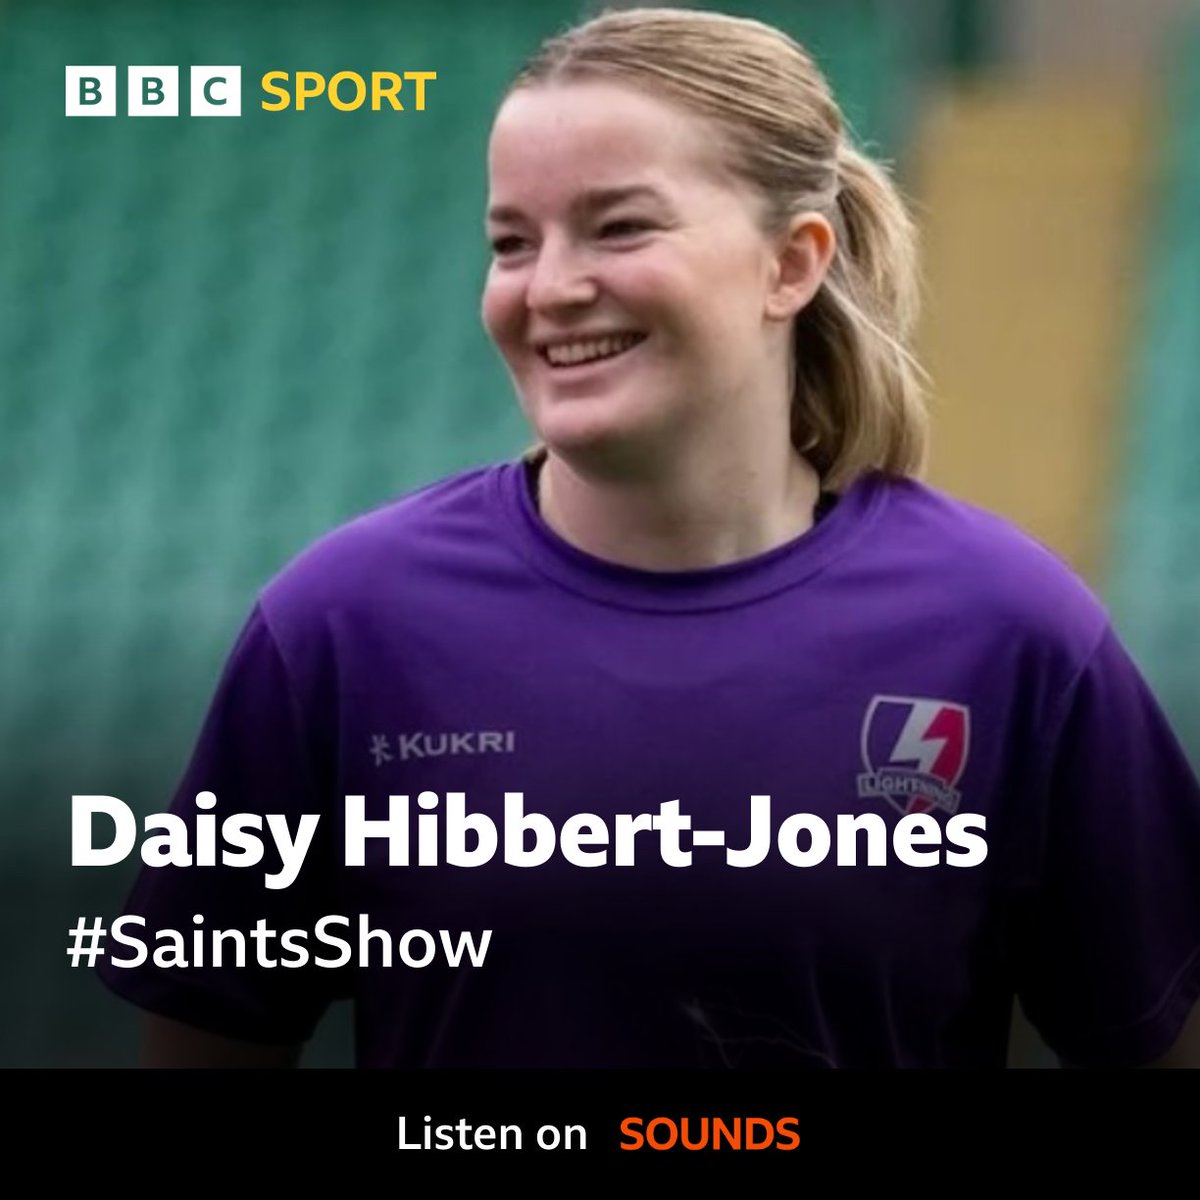 On this week's #SaintsShow podcast:

* @Daisyhj1 on @LightningRugby v Sale
* @CallumBraley on @SaintsRugby v Sale
* @paulhill101 on front-row, arm-chair critics
* @GeorgeFurbank on painting his spare room

It's all here for you on @BBCSounds: bbc.co.uk/sounds/play/p0…